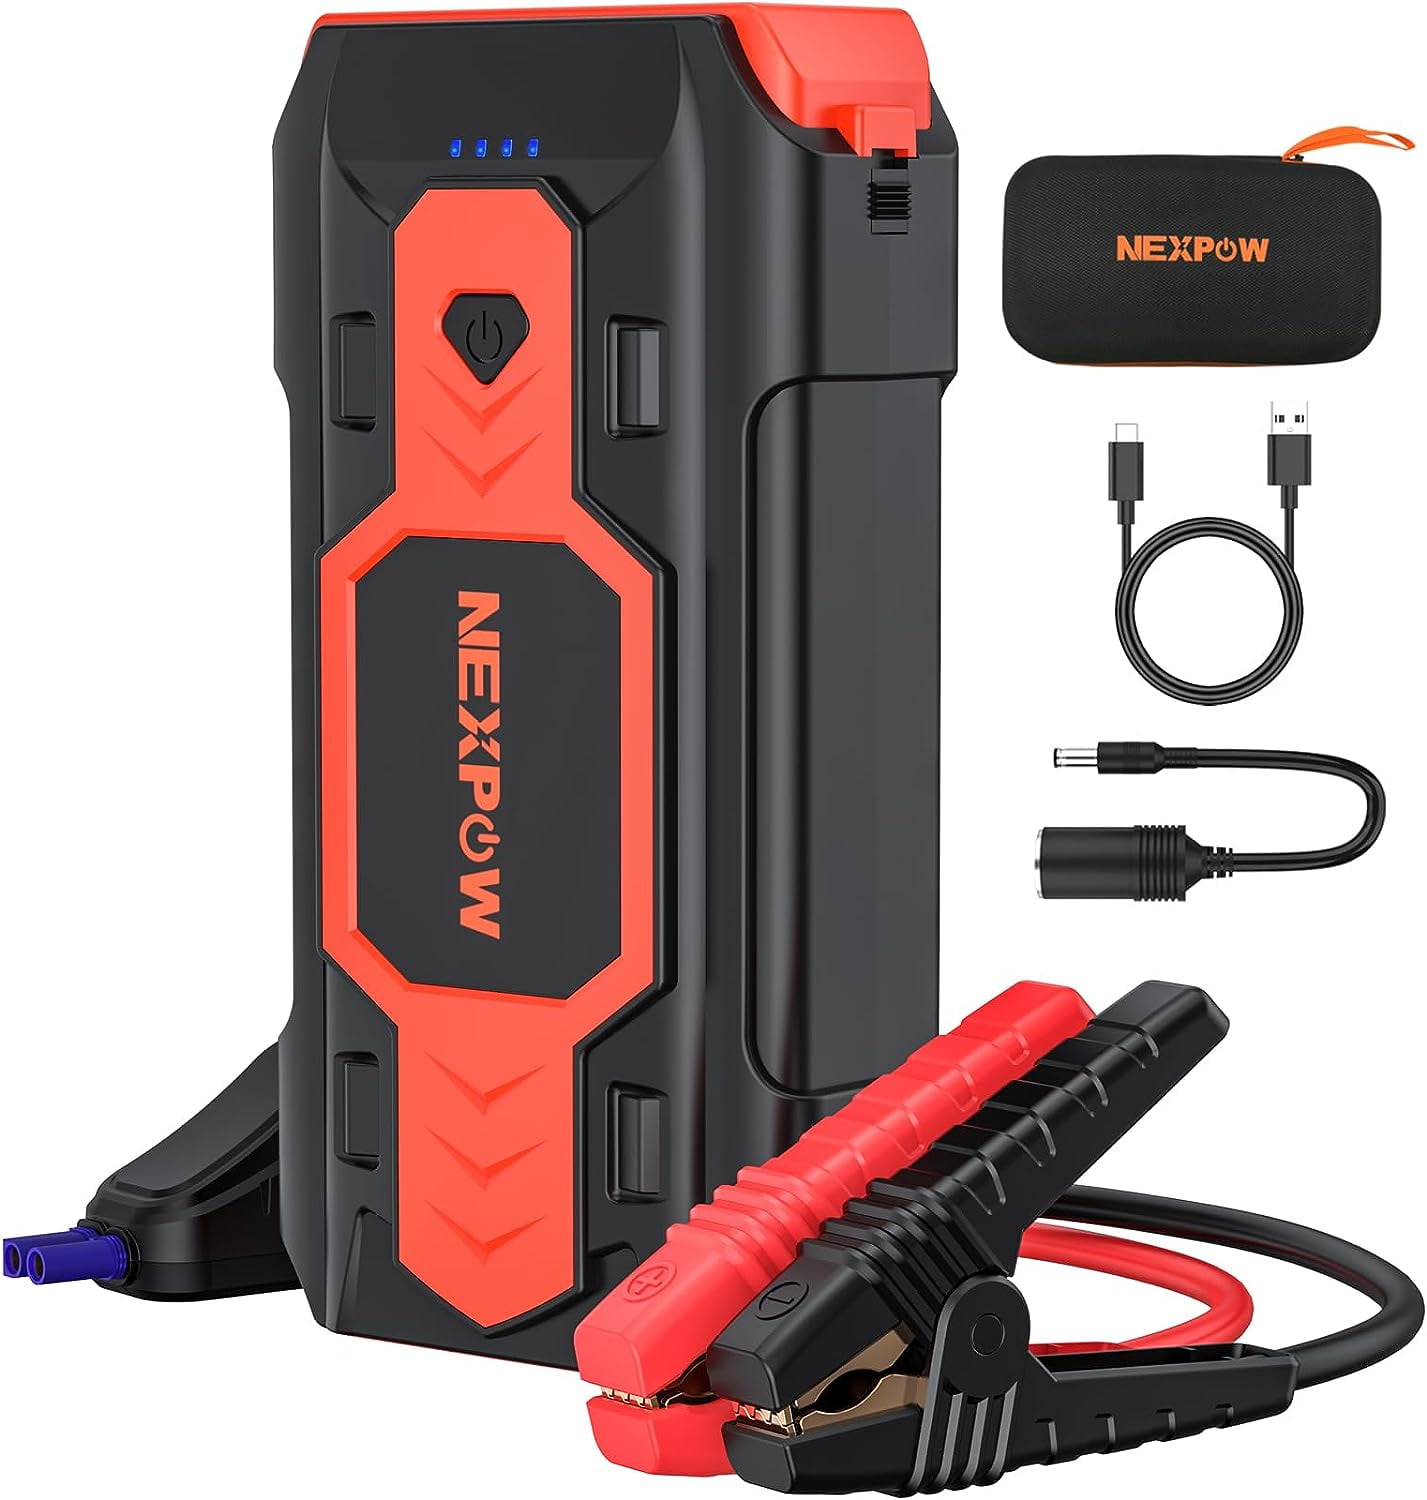 GOOLOO Car Battery Jump Starter,4500A Peak Jump Starter with USB Quick  Charge (for 10L Gas or Up to 8L Diesel),GE4500 12V Jumper Pack with LED  Light